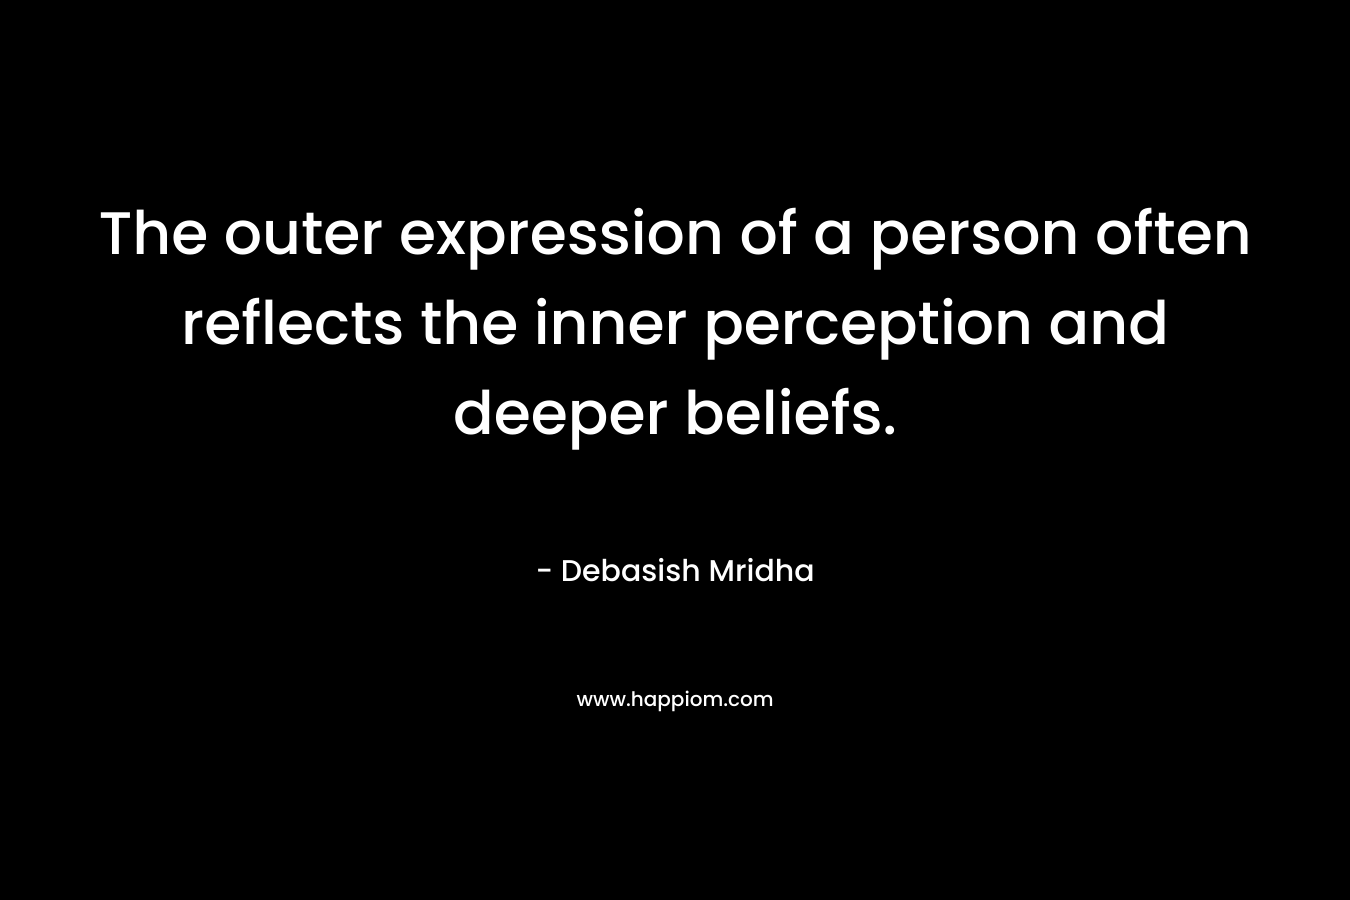 The outer expression of a person often reflects the inner perception and deeper beliefs. – Debasish Mridha